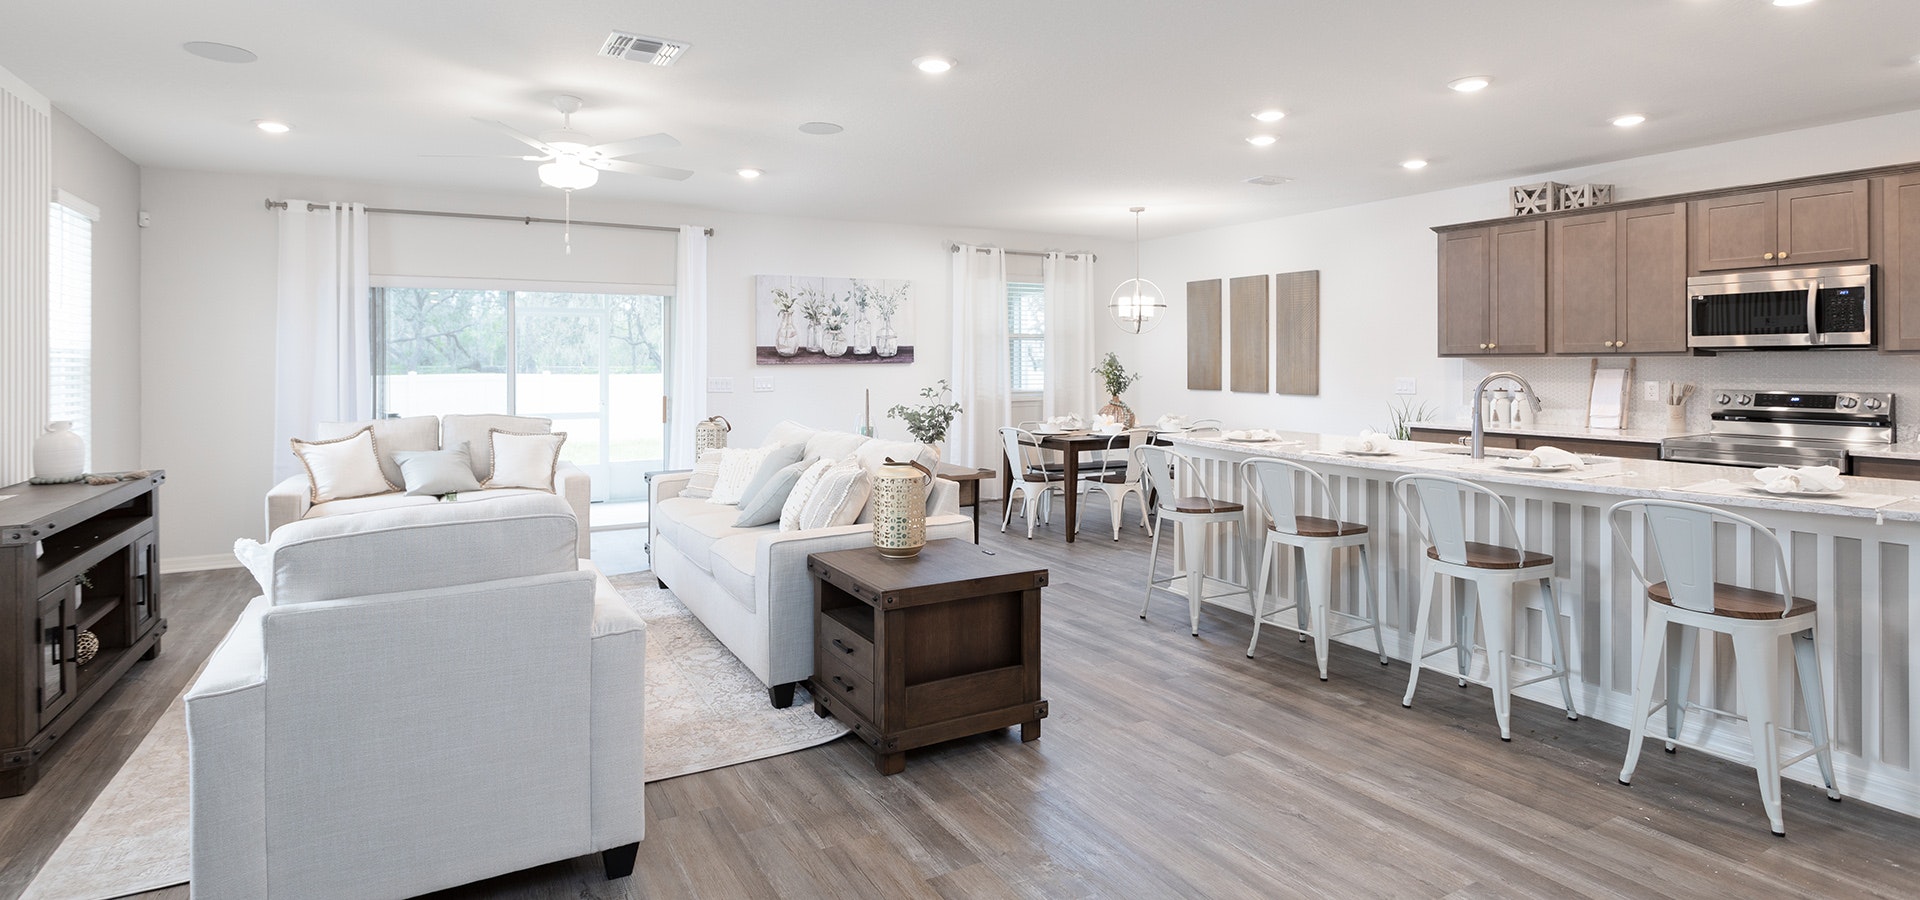 Wesley II, a new 5-bedroom home in Florida by Highland Homes